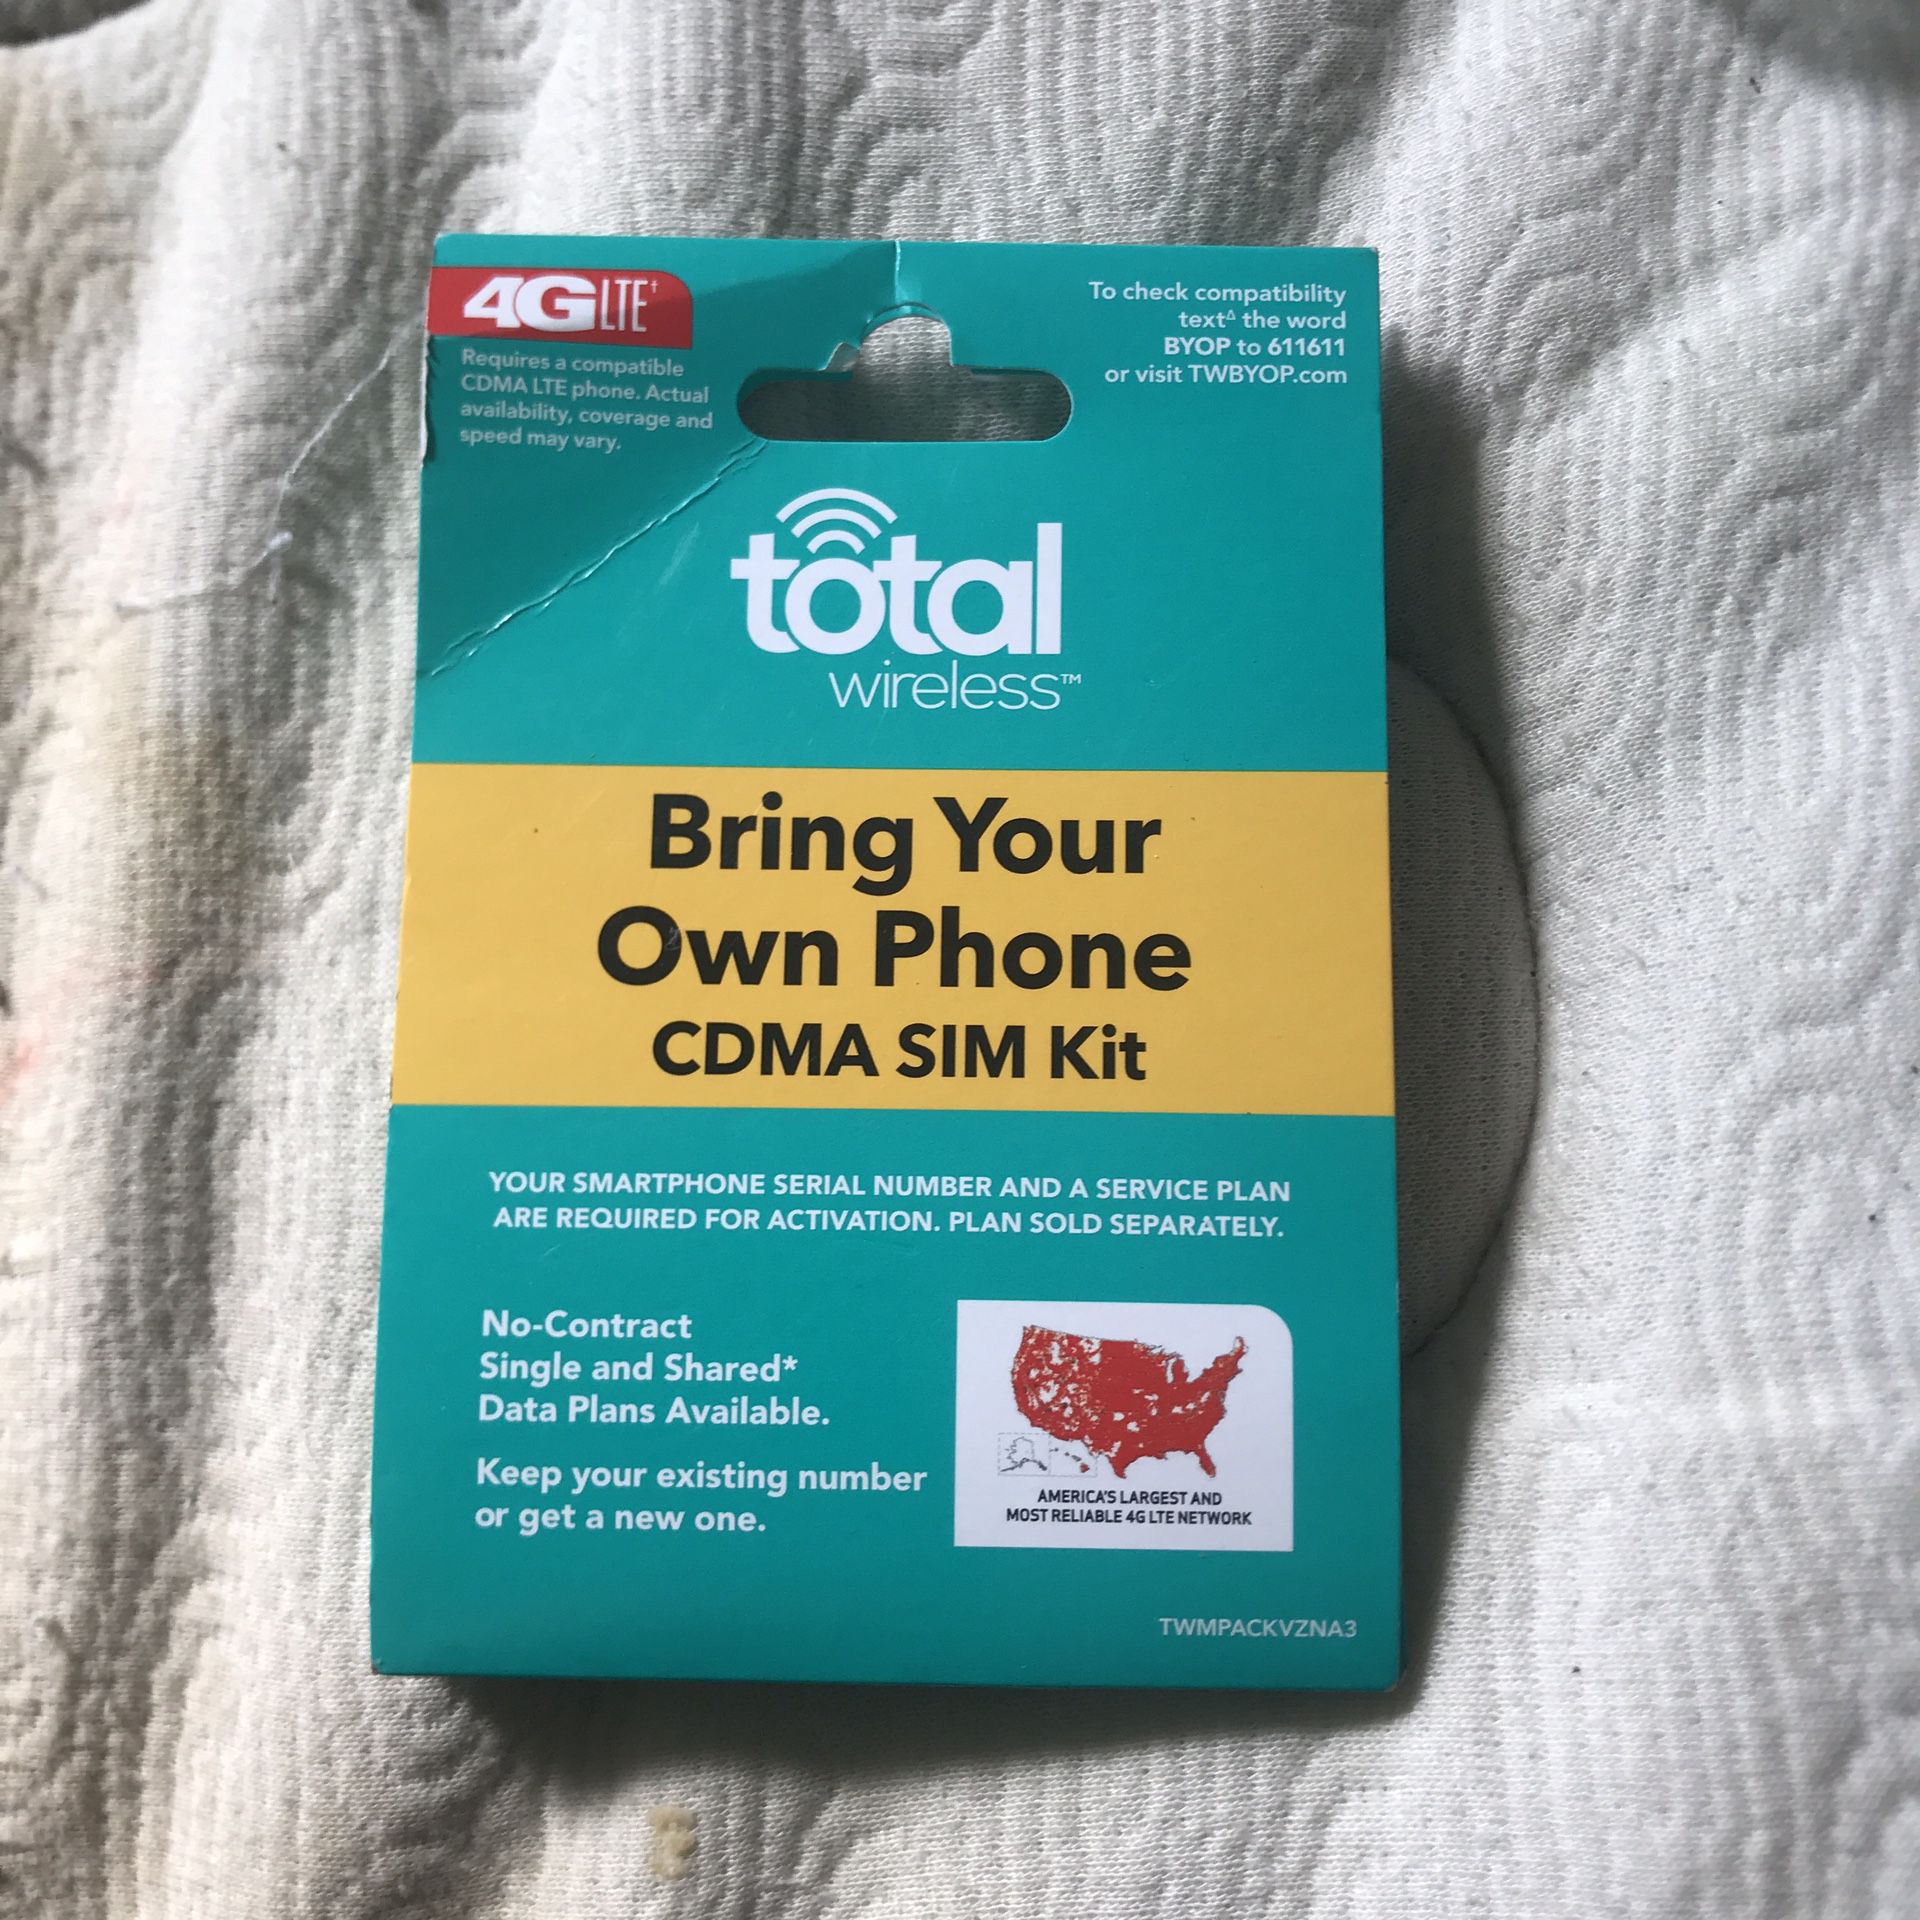 "Total wireless" SIM card kit for bring your own puone